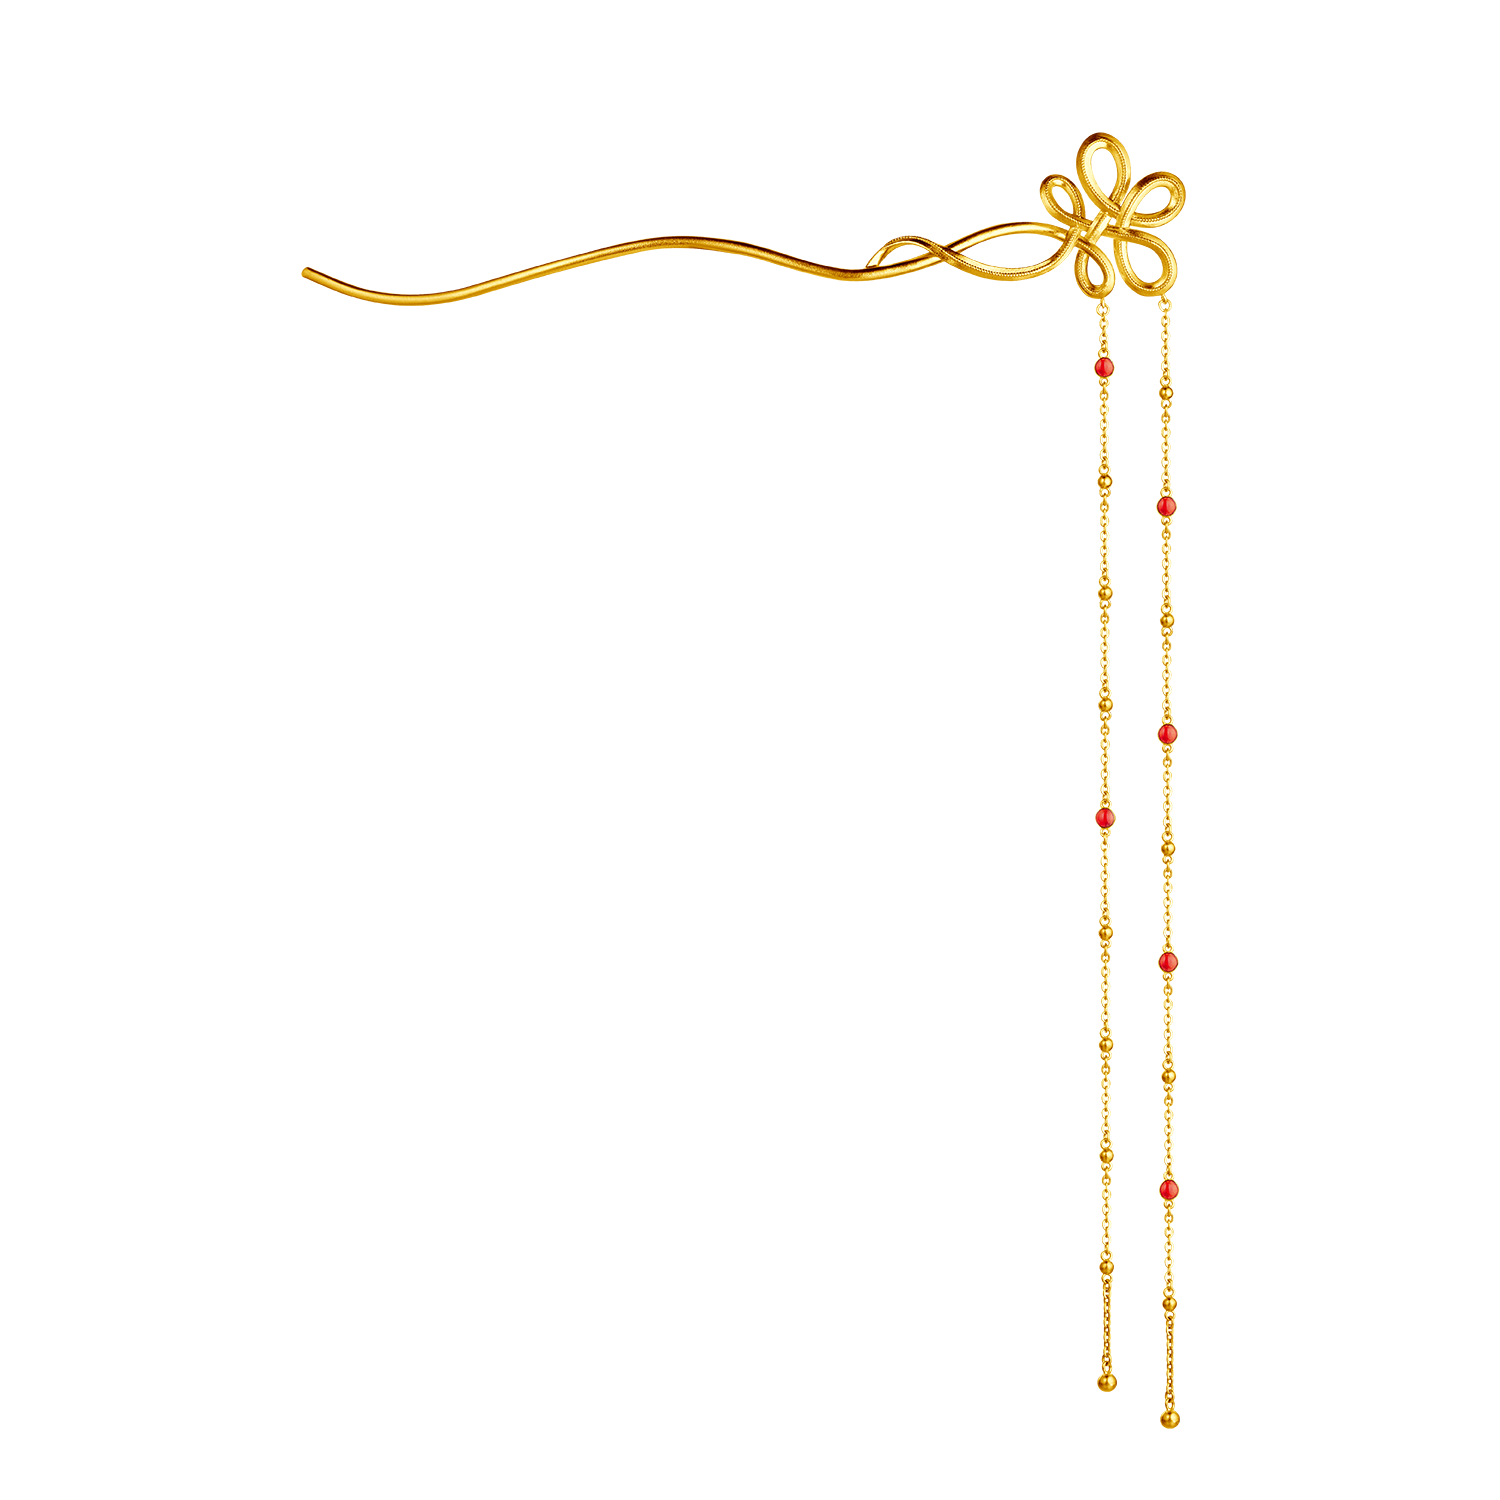 Heirloom Fortune Collection "Heirloom Fortune - Tie the Knot" Gold Hairpin